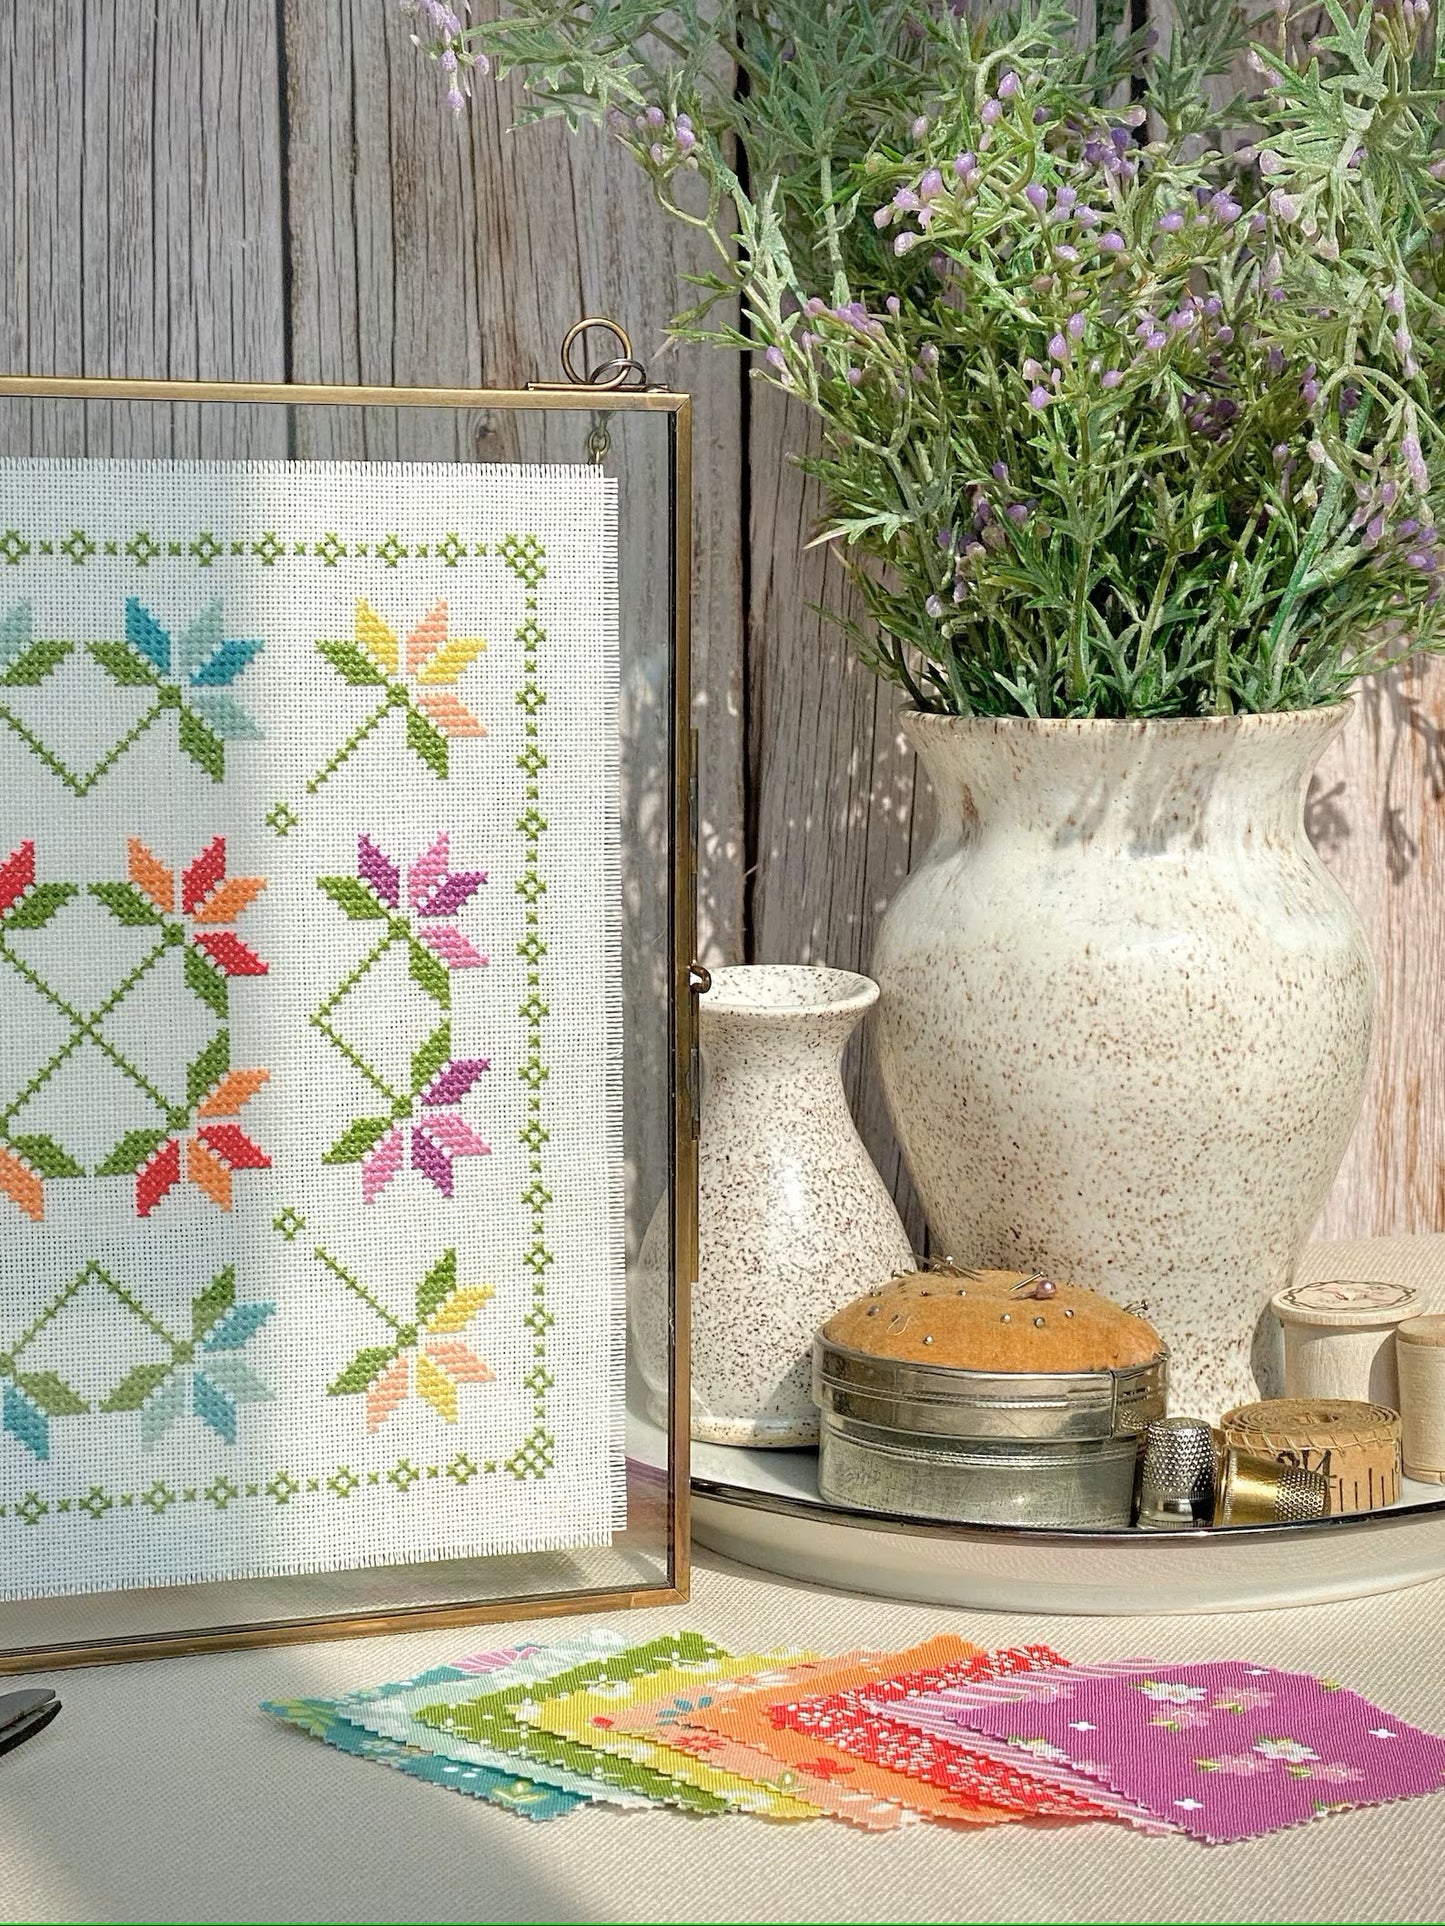 Lilies Mini Cross Stitch Pattern by Count Your Stitches Designs